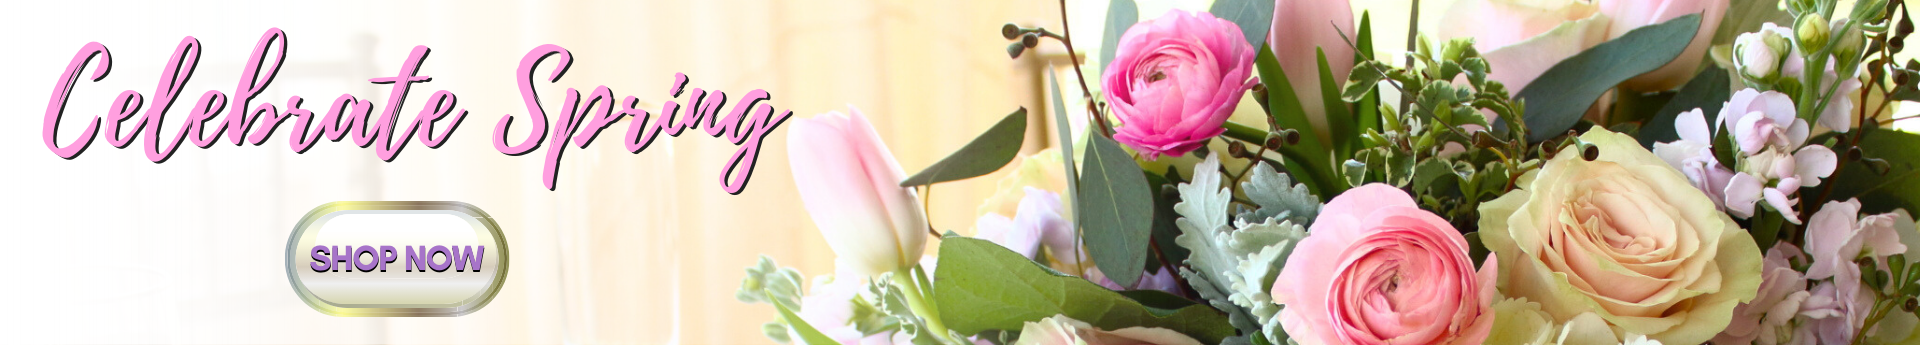 Best florist for same day delivery in Washington, DC